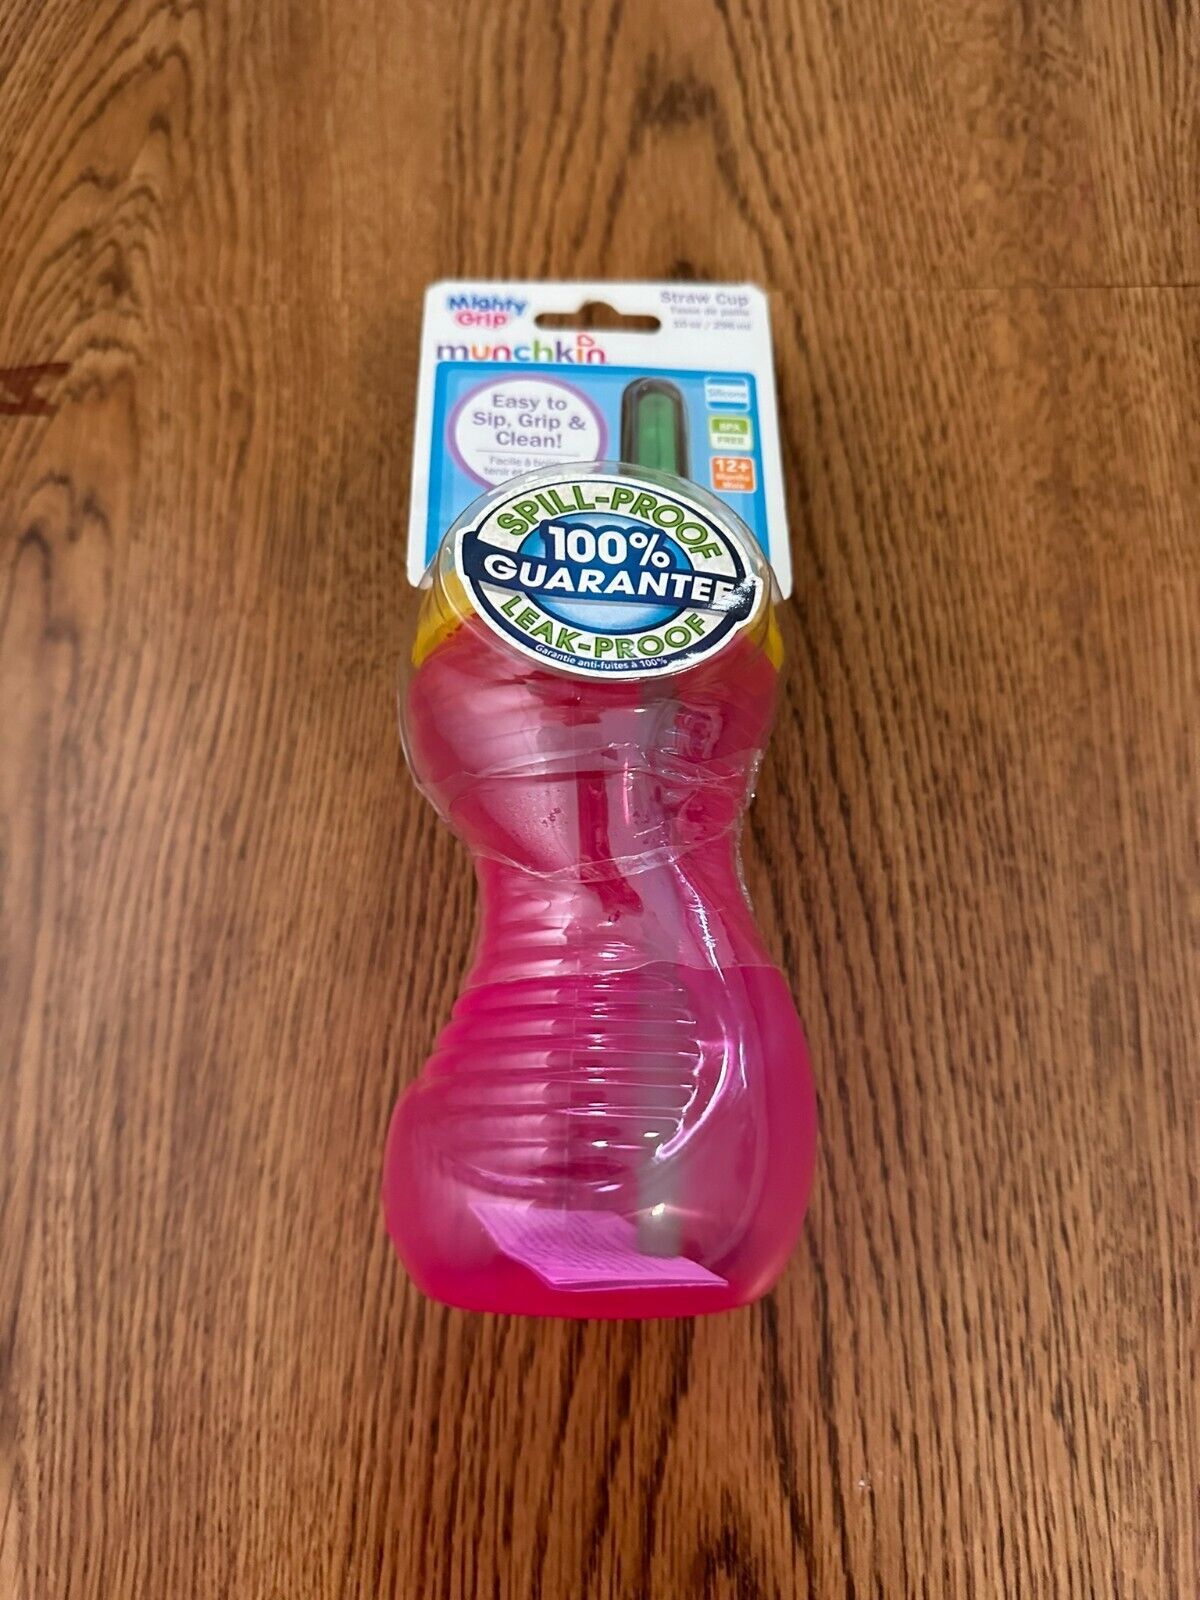 Munchkin Mighty Grip Straw Cup Pink 10oz - Brand New and Sealed - $7.91